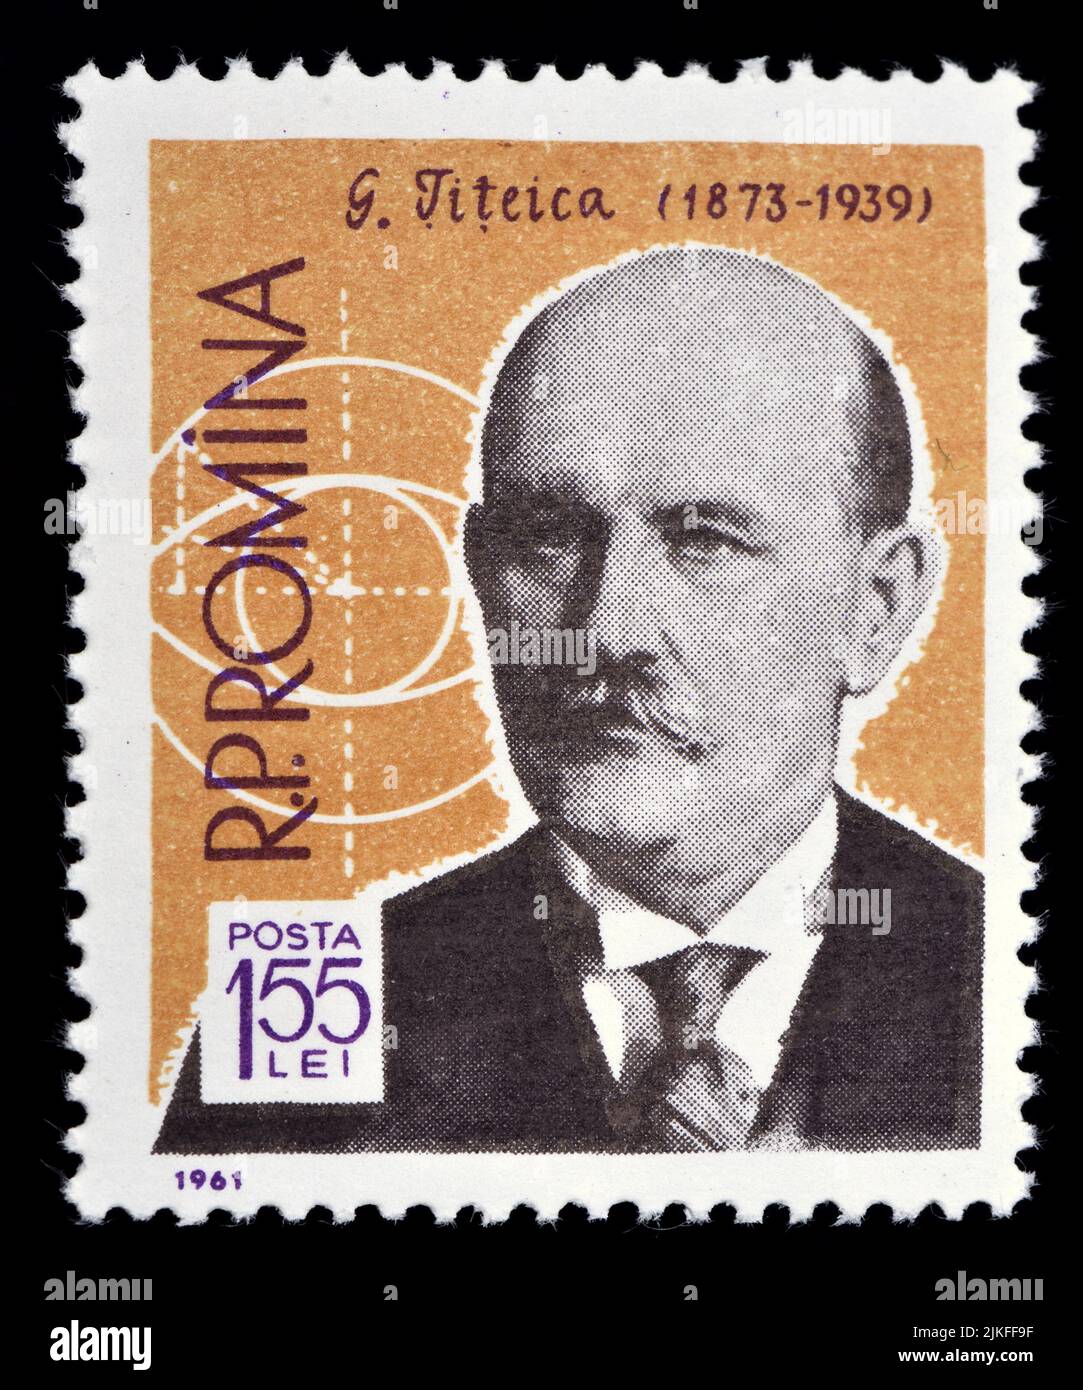 Romanian postage stamp (1961) : Gheorghe Țițeica (1873 – 1939) George / Georges Tzitzéica - Romanian mathematician who made important contributions in Stock Photo